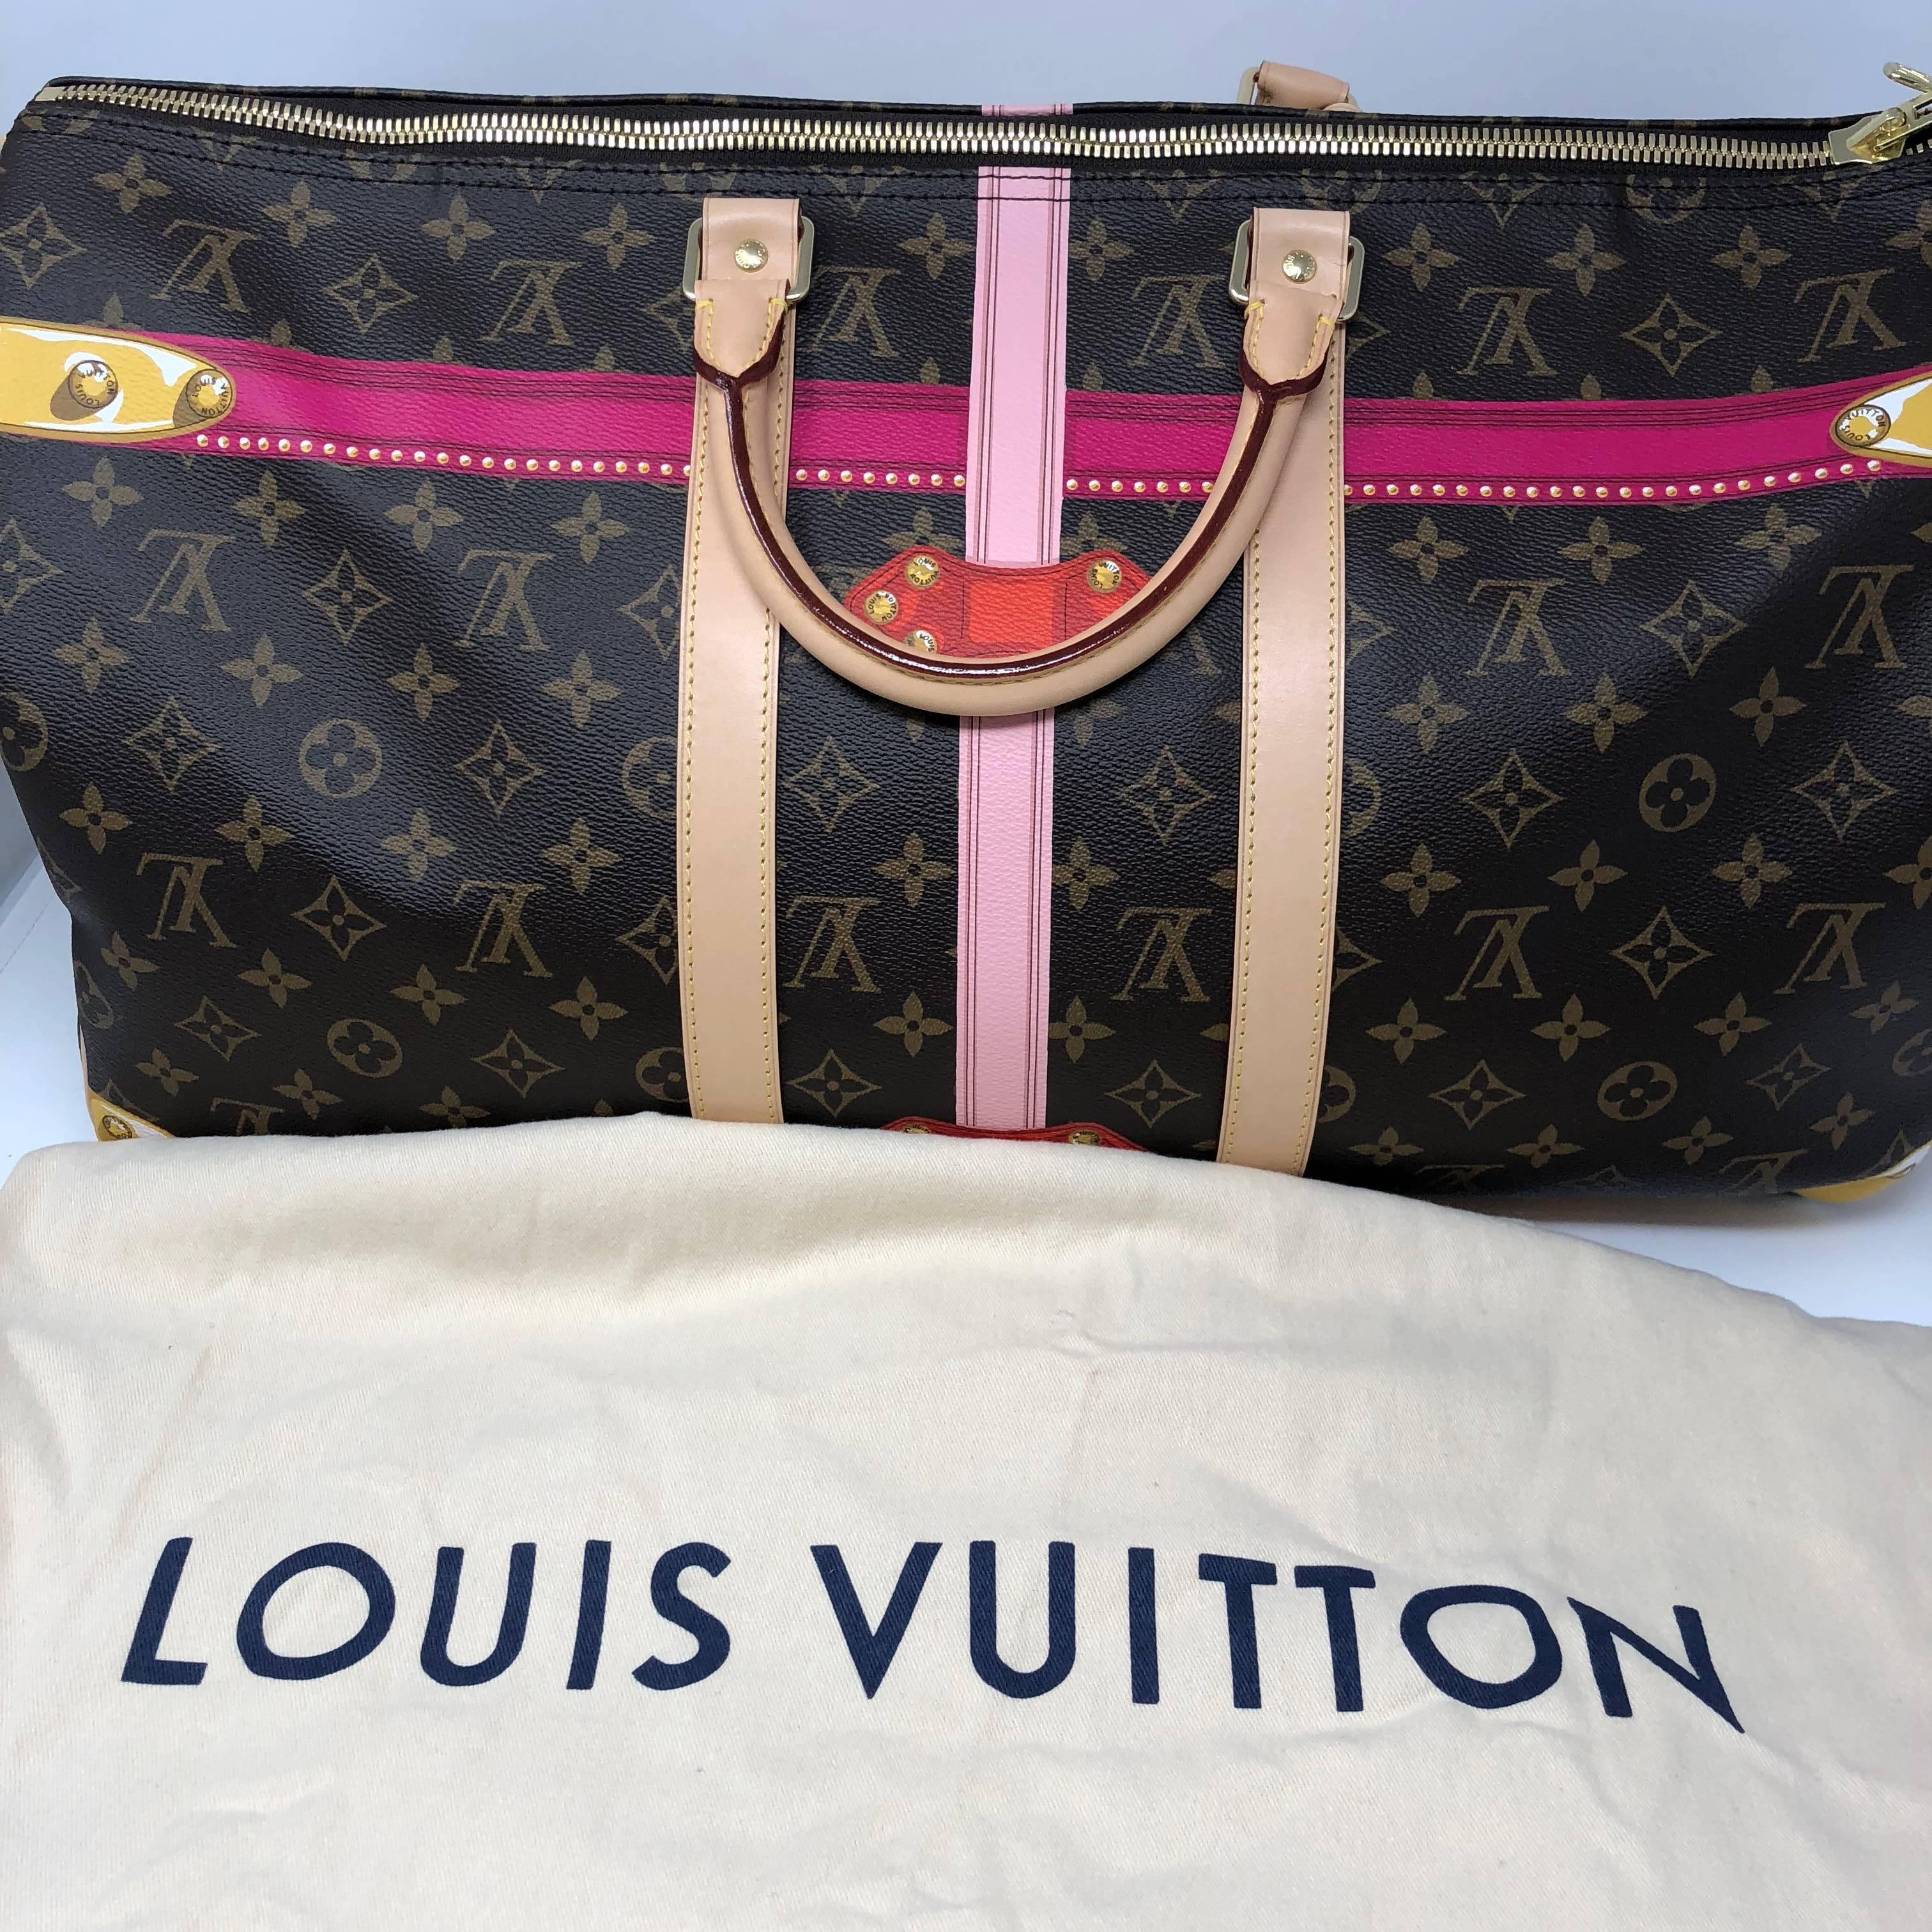 Louis Vuitton Keepall Limited Edition Trunks, 2018 2